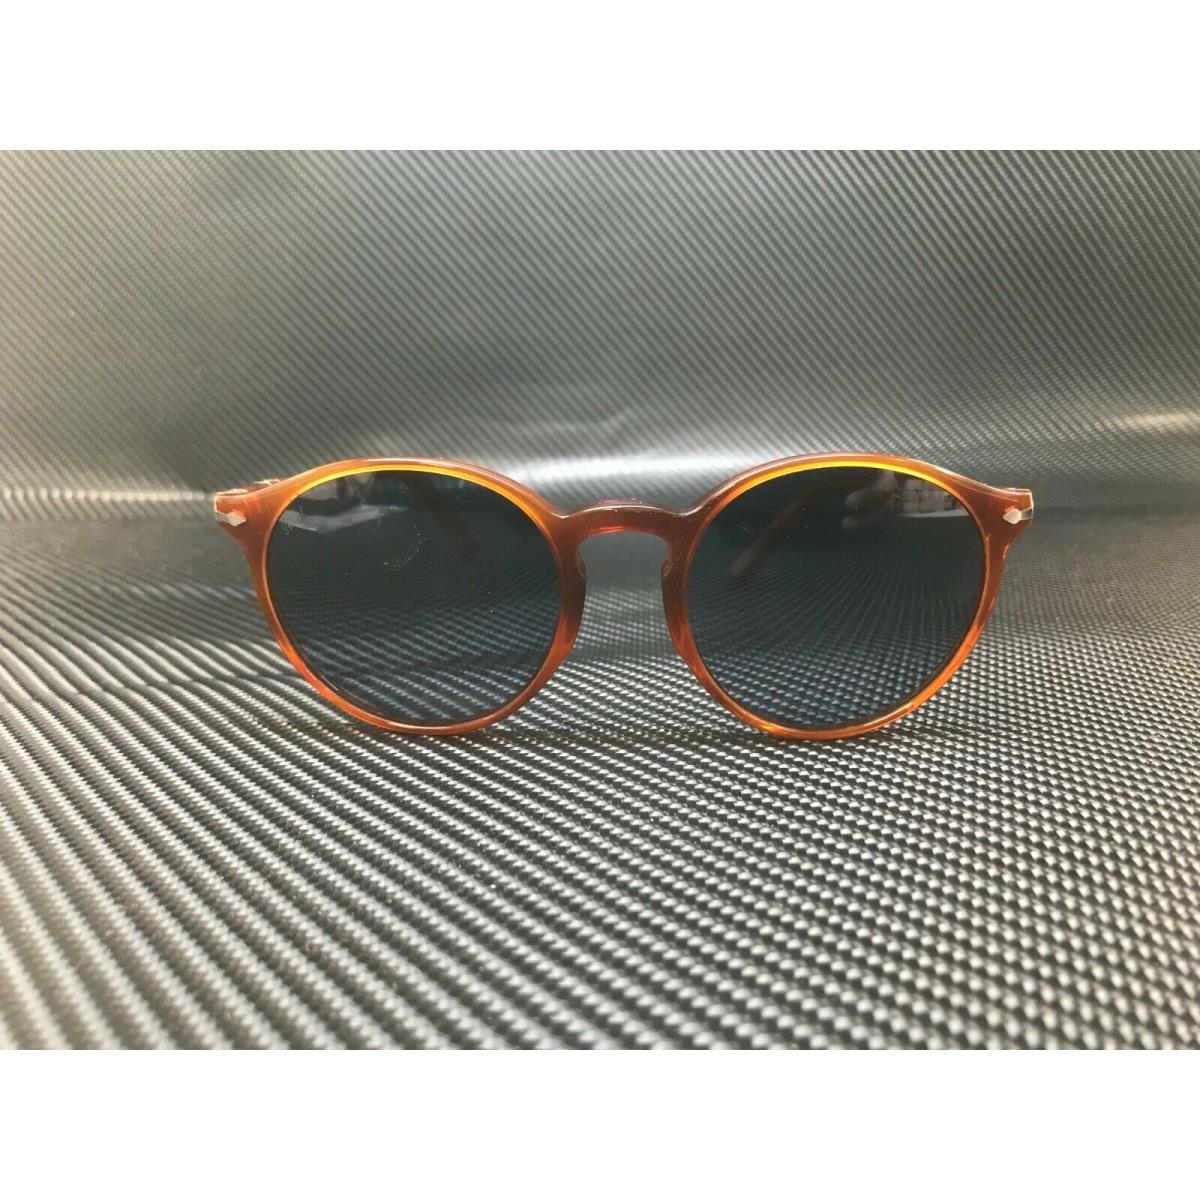 Persol sunglasses  - Brown Frame 0